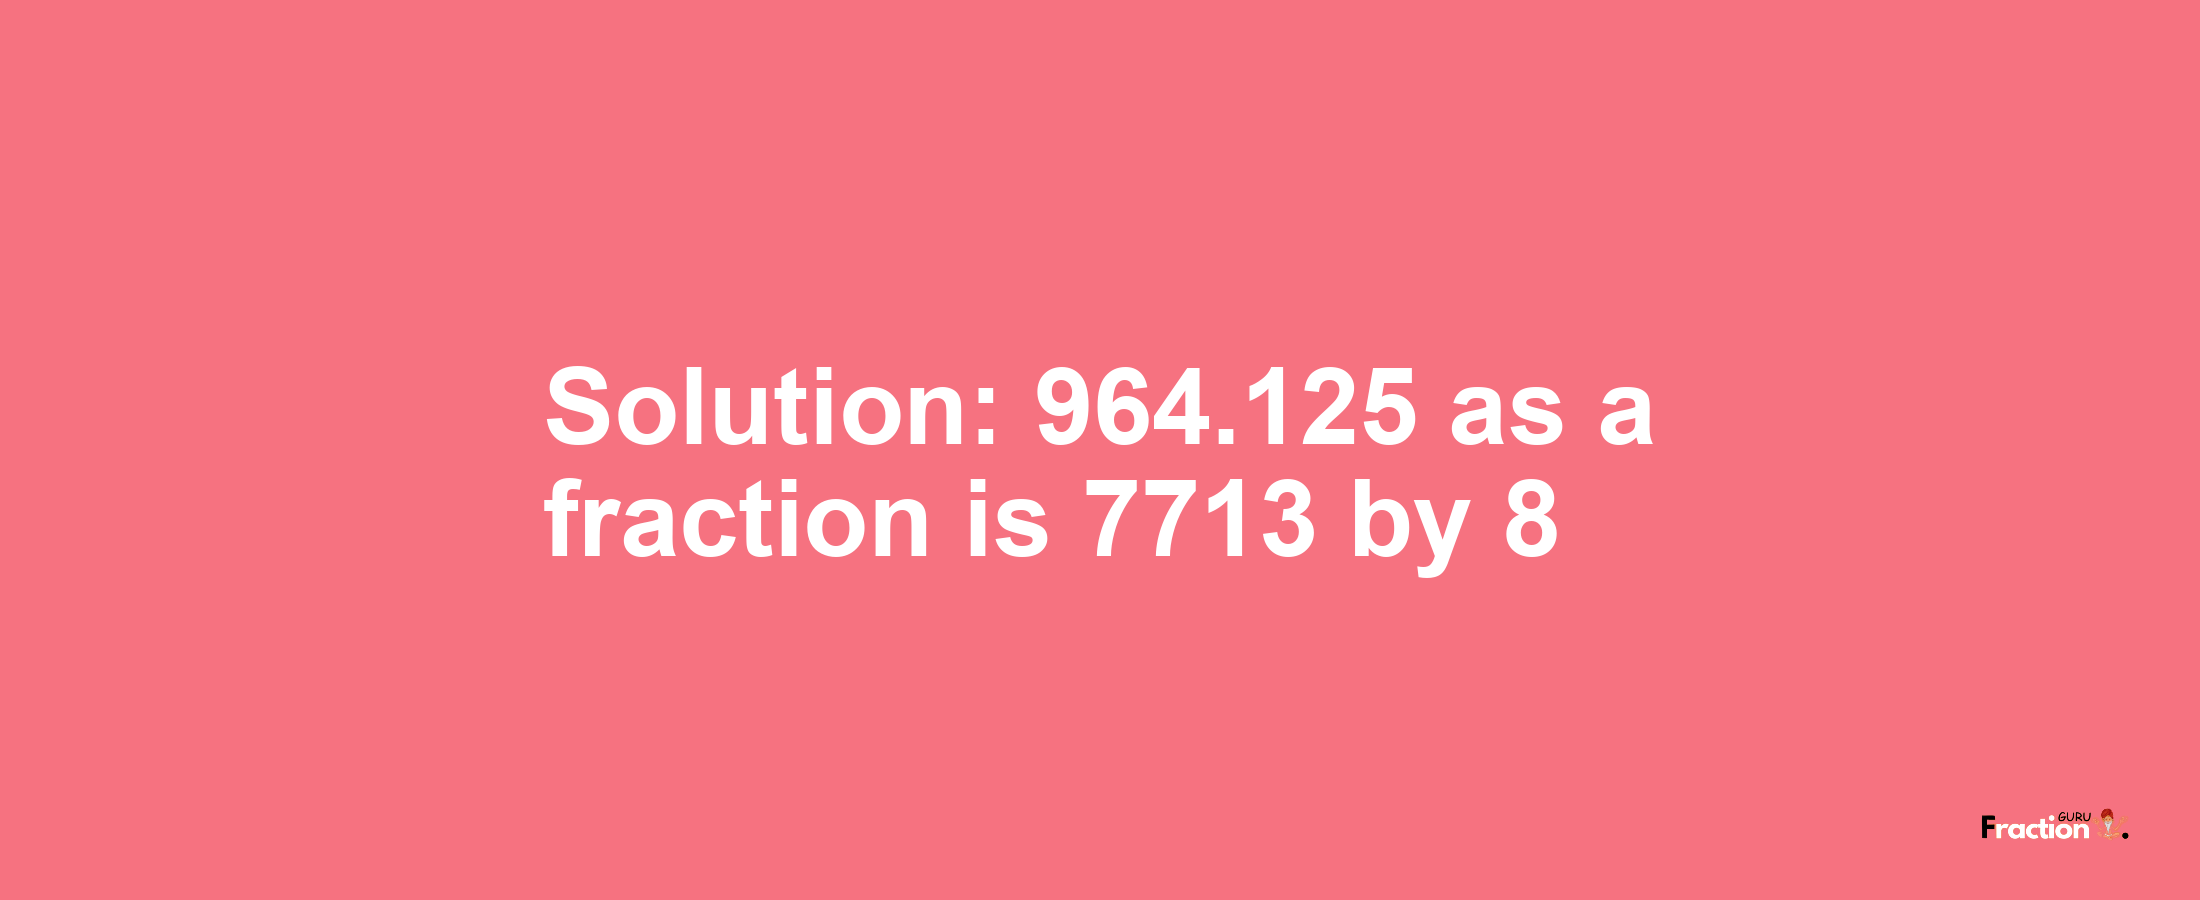 Solution:964.125 as a fraction is 7713/8